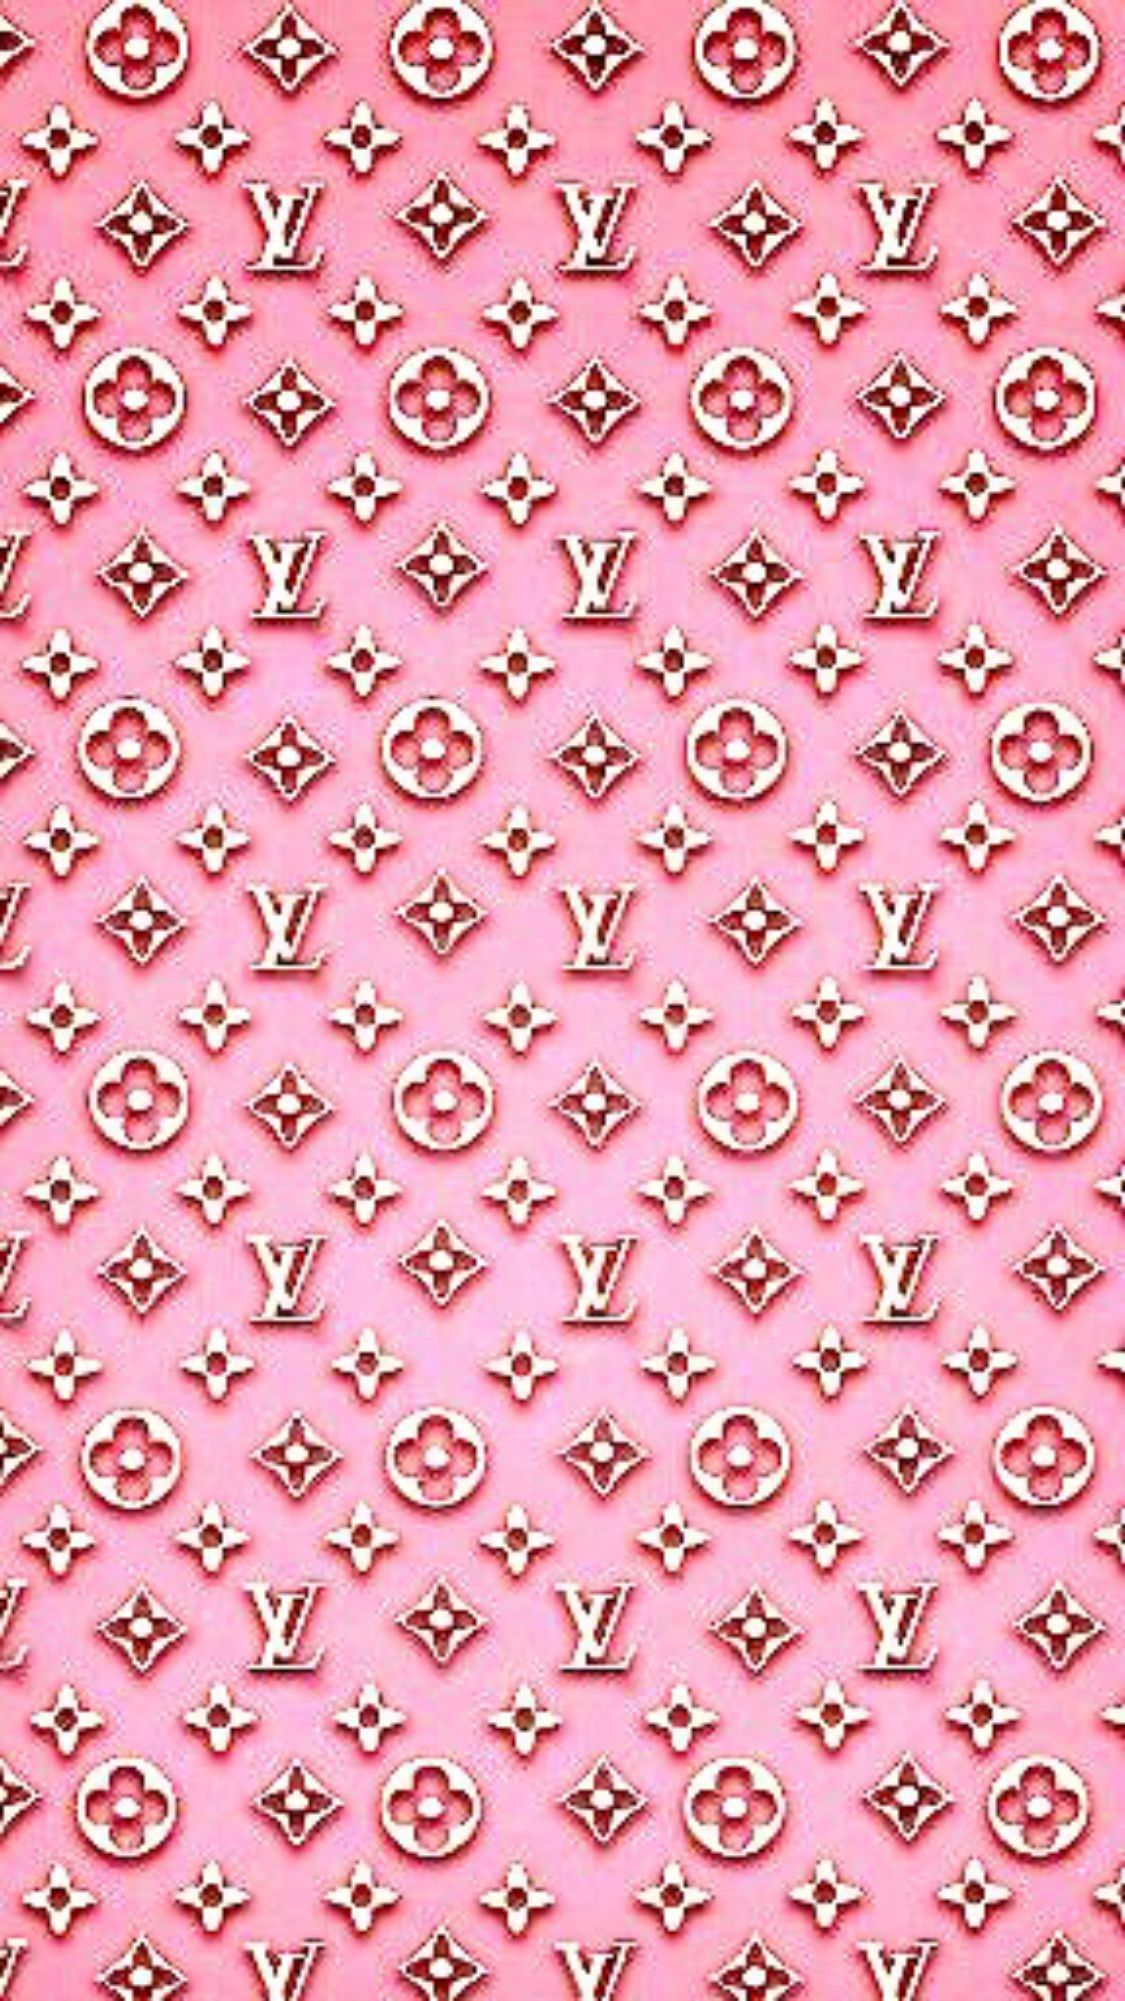 Neon Louis Vuitton Wallpapers on